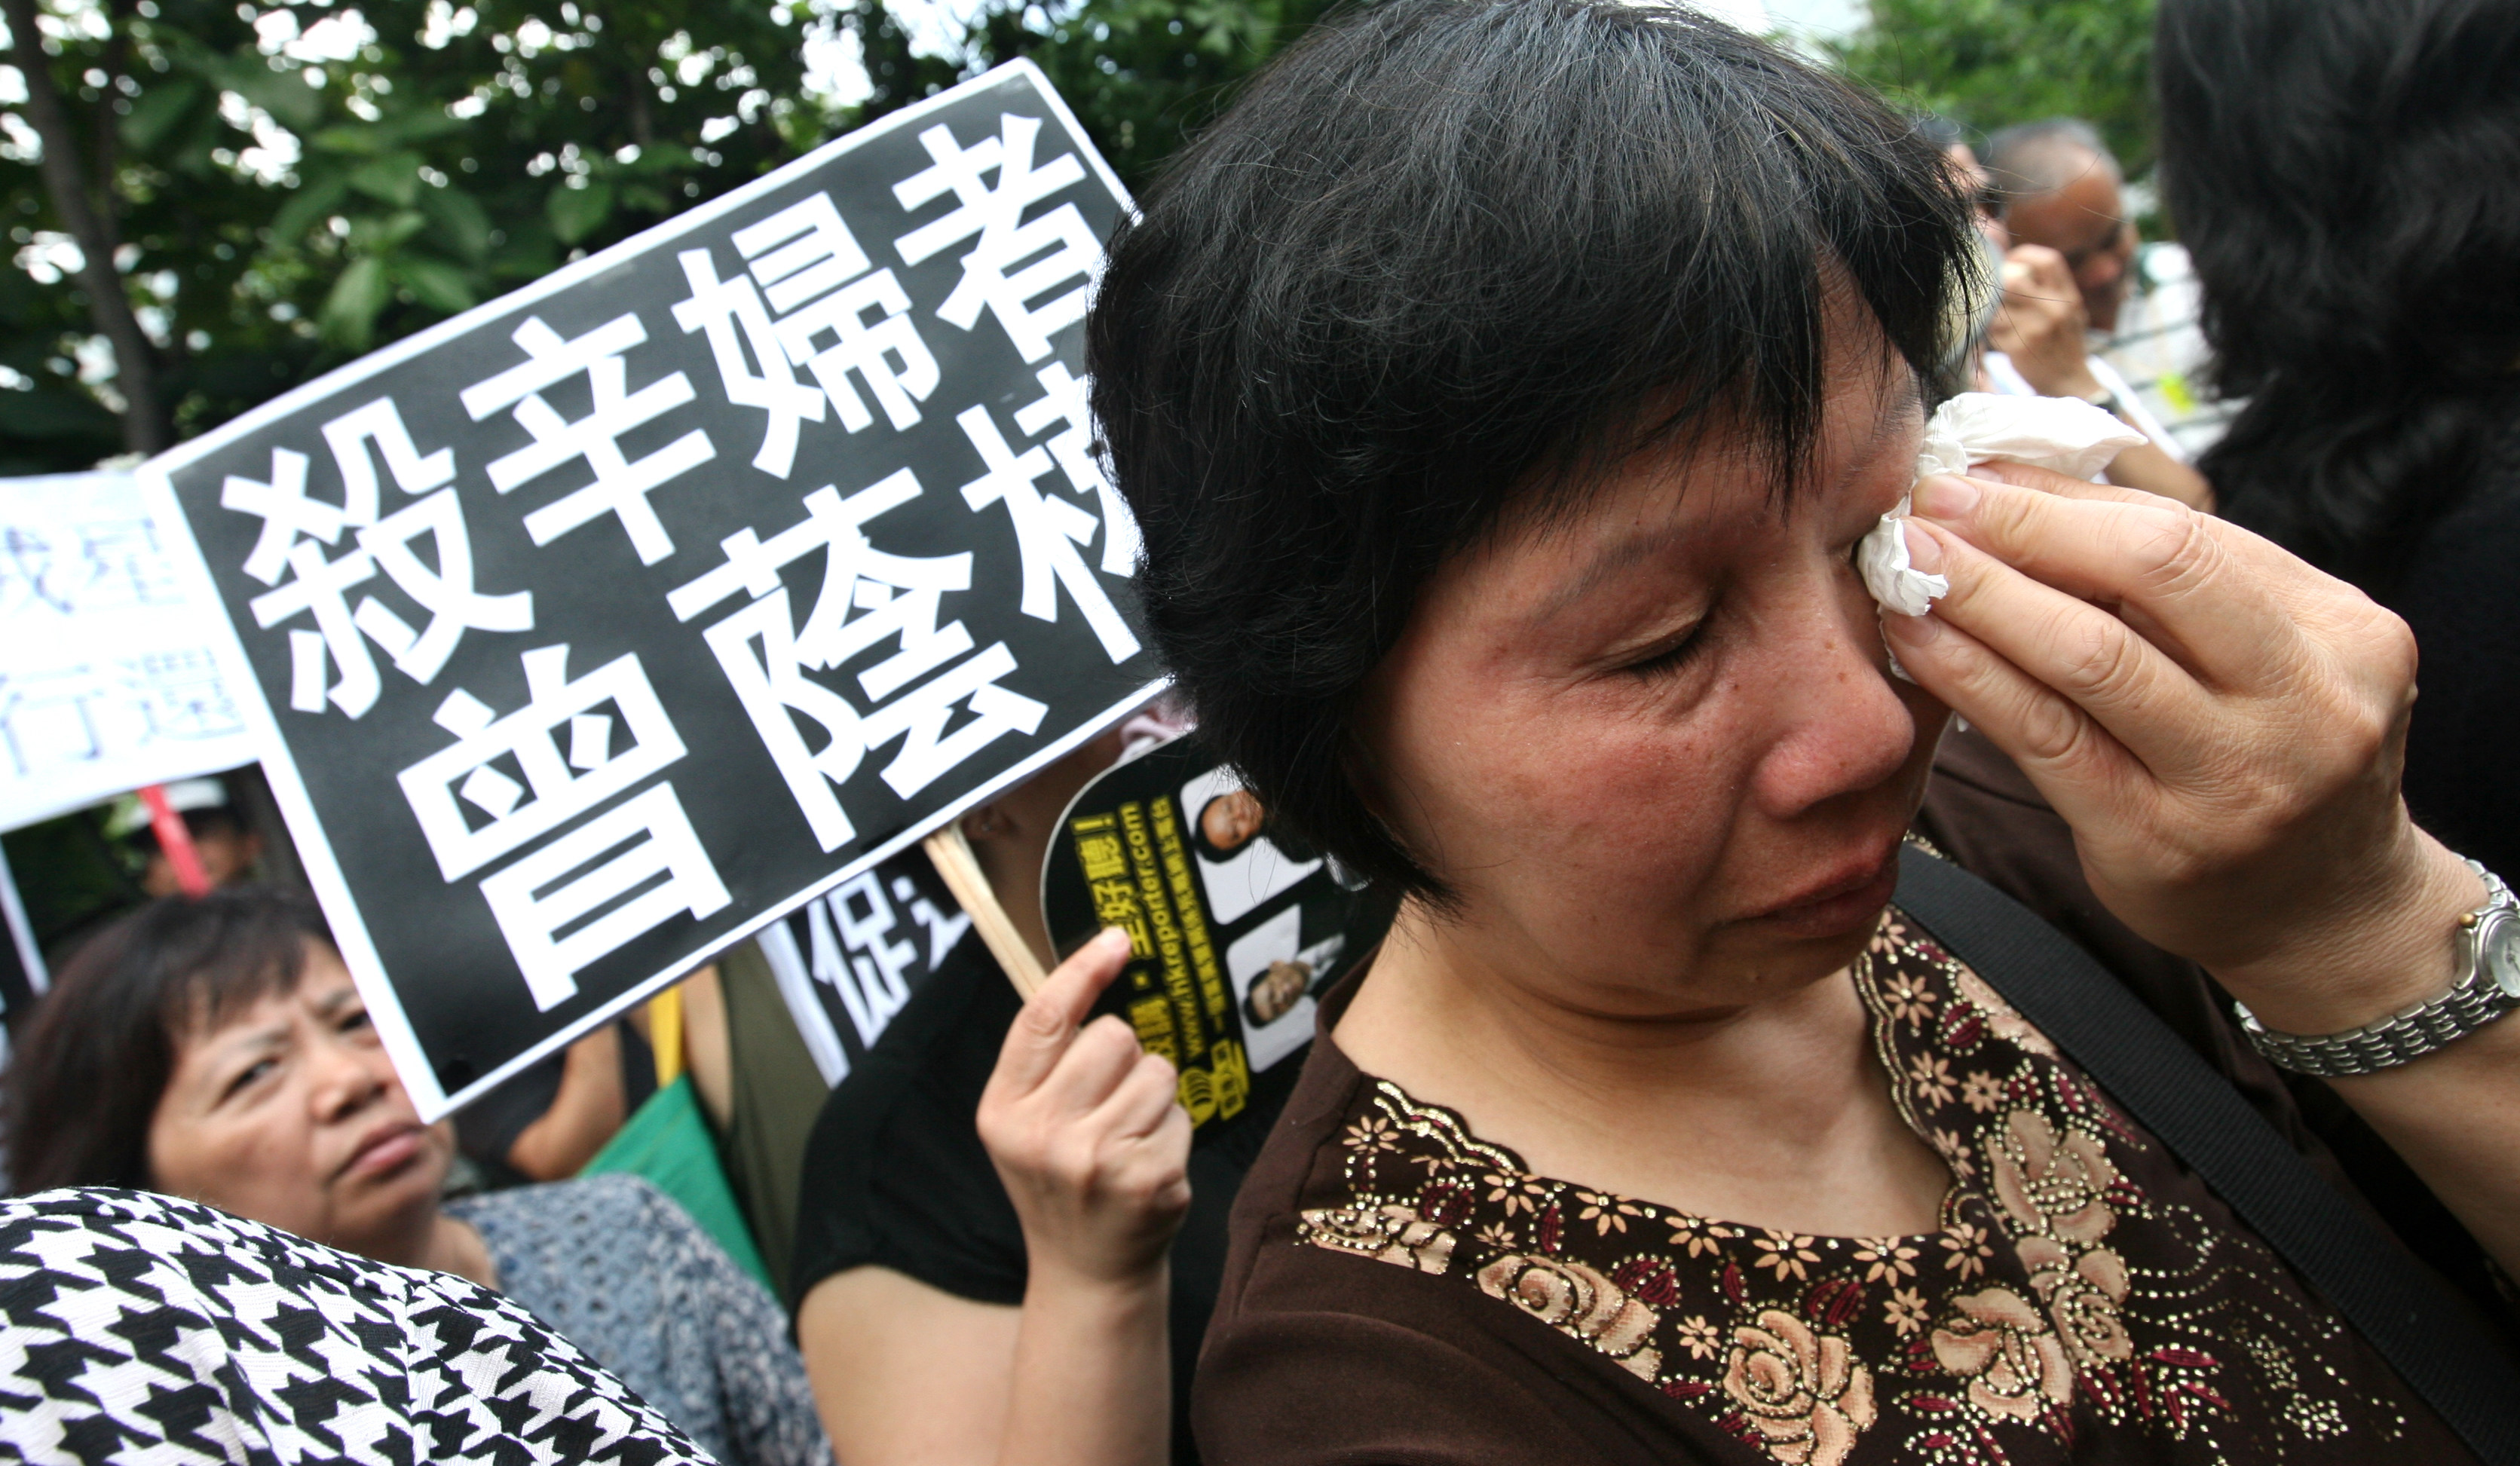 Hong Kong investors protest outside Government House last year over minibonds they claim Lehman Brothers misled them into buying. Photo: Felix Wong